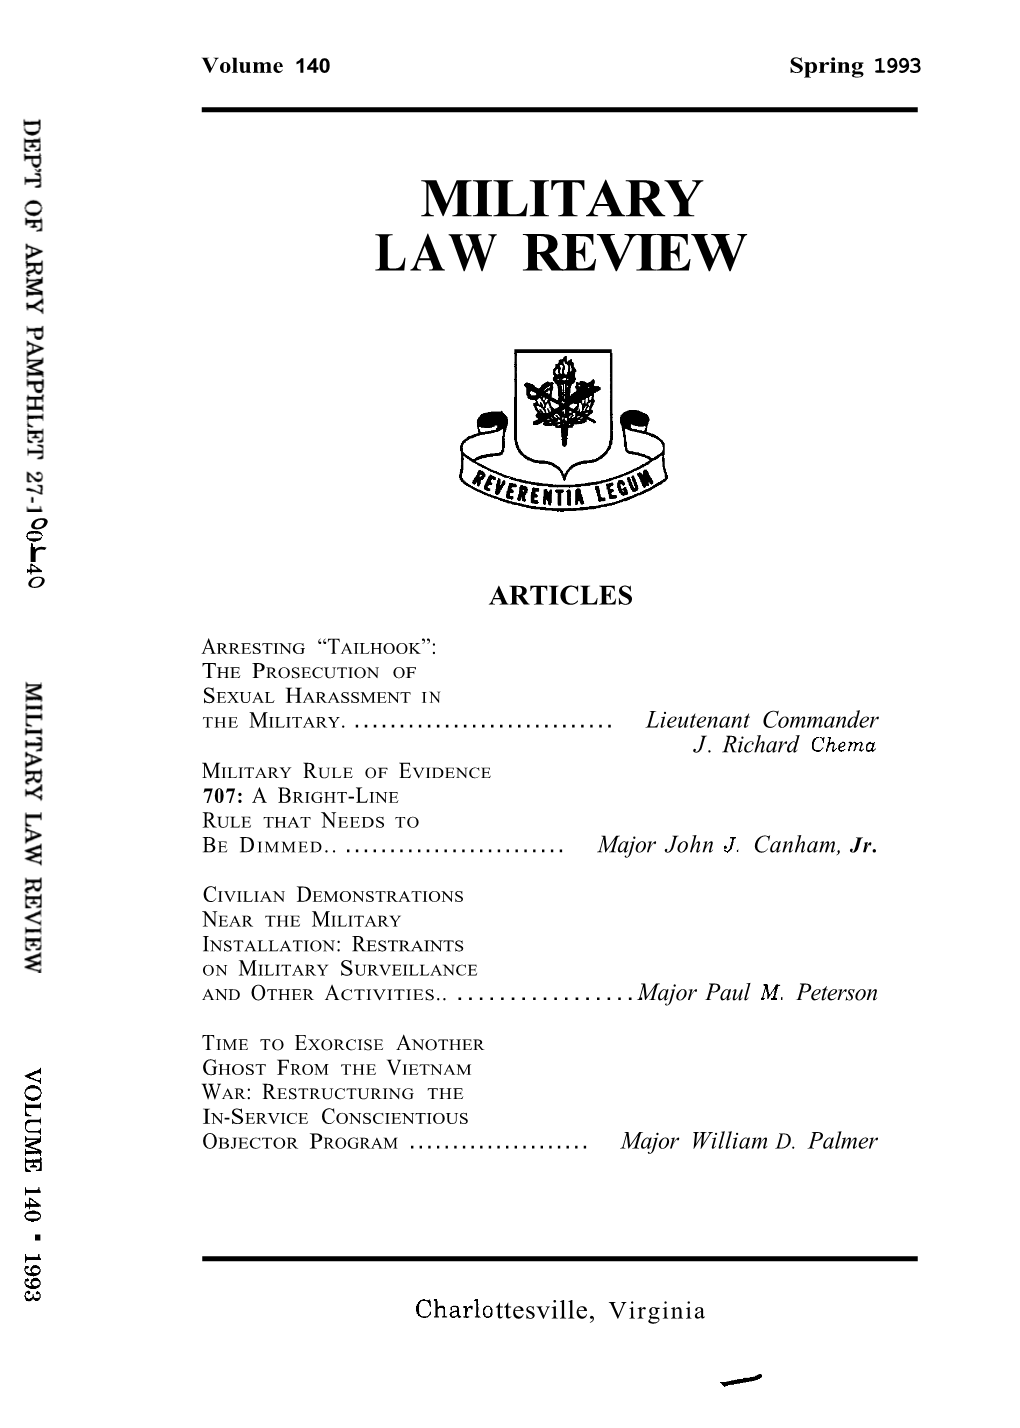 Military Law Review-Volume 140